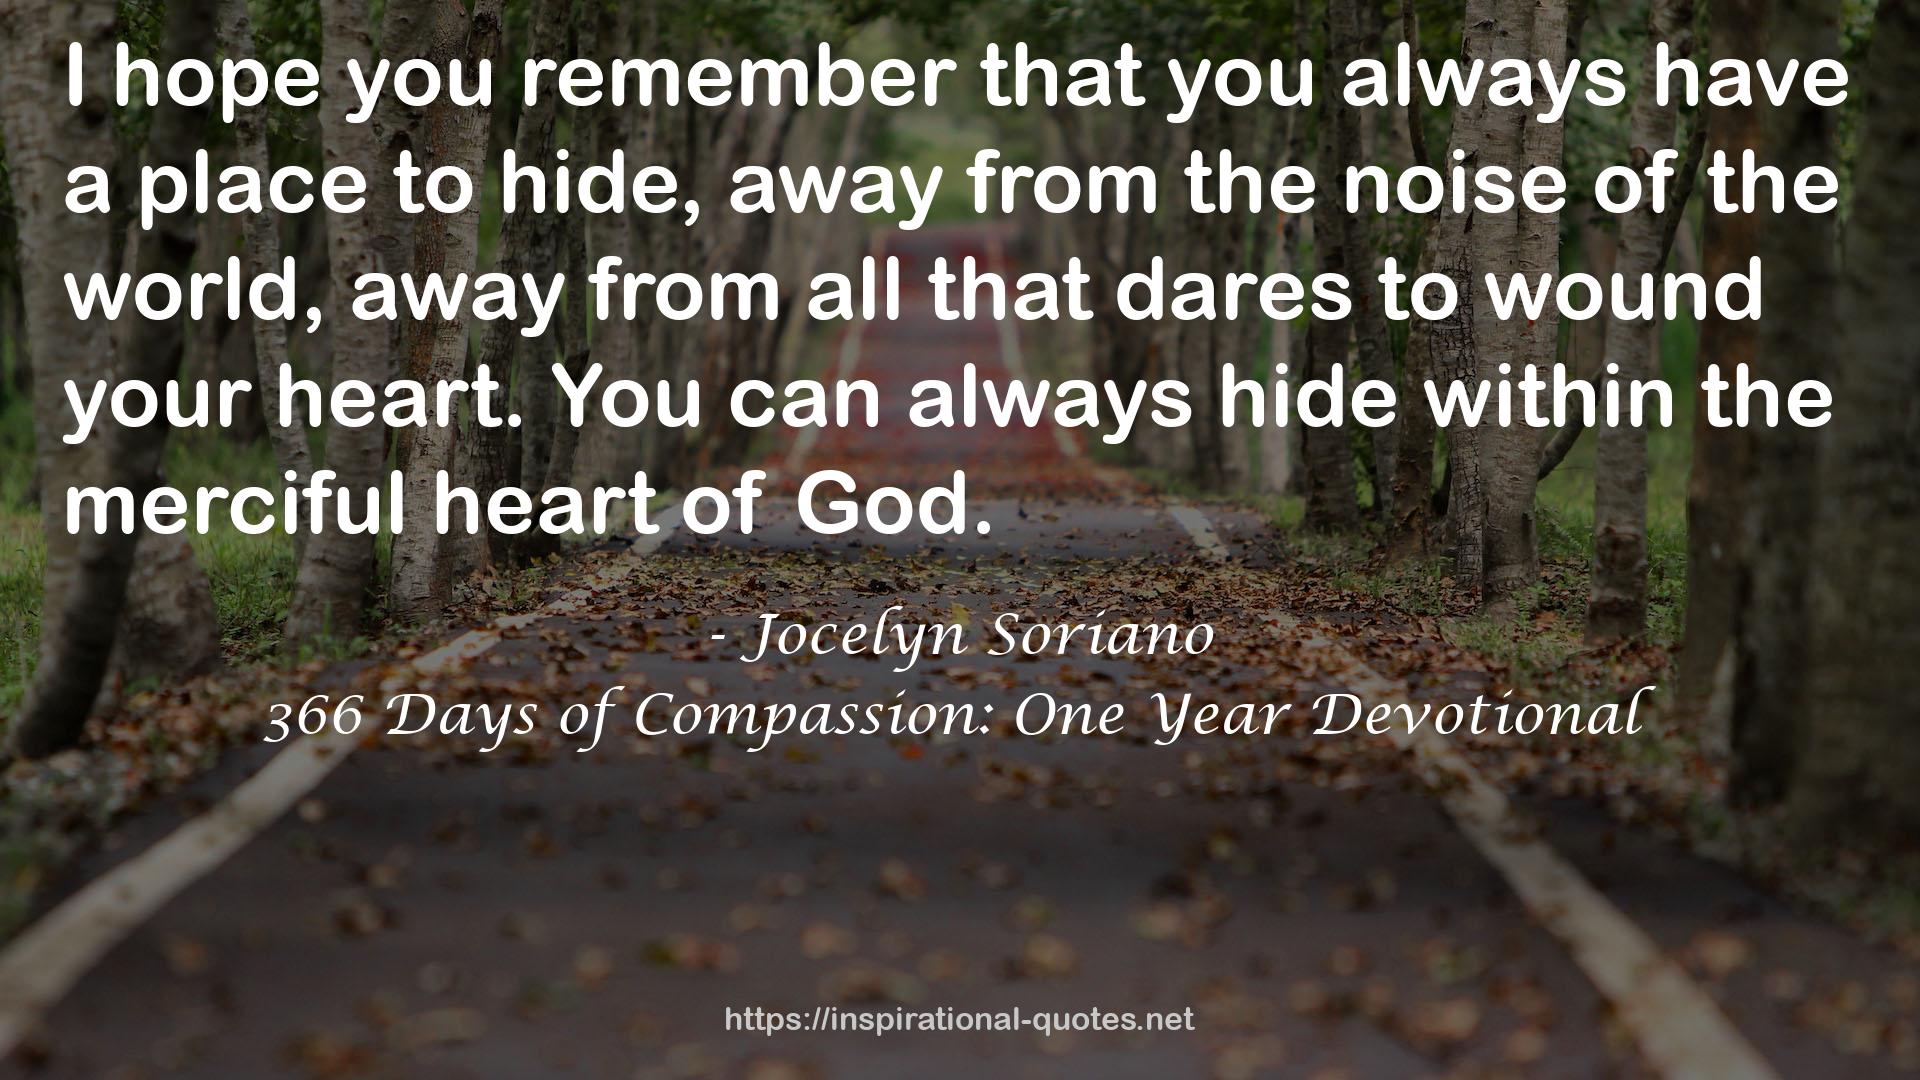 366 Days of Compassion: One Year Devotional QUOTES